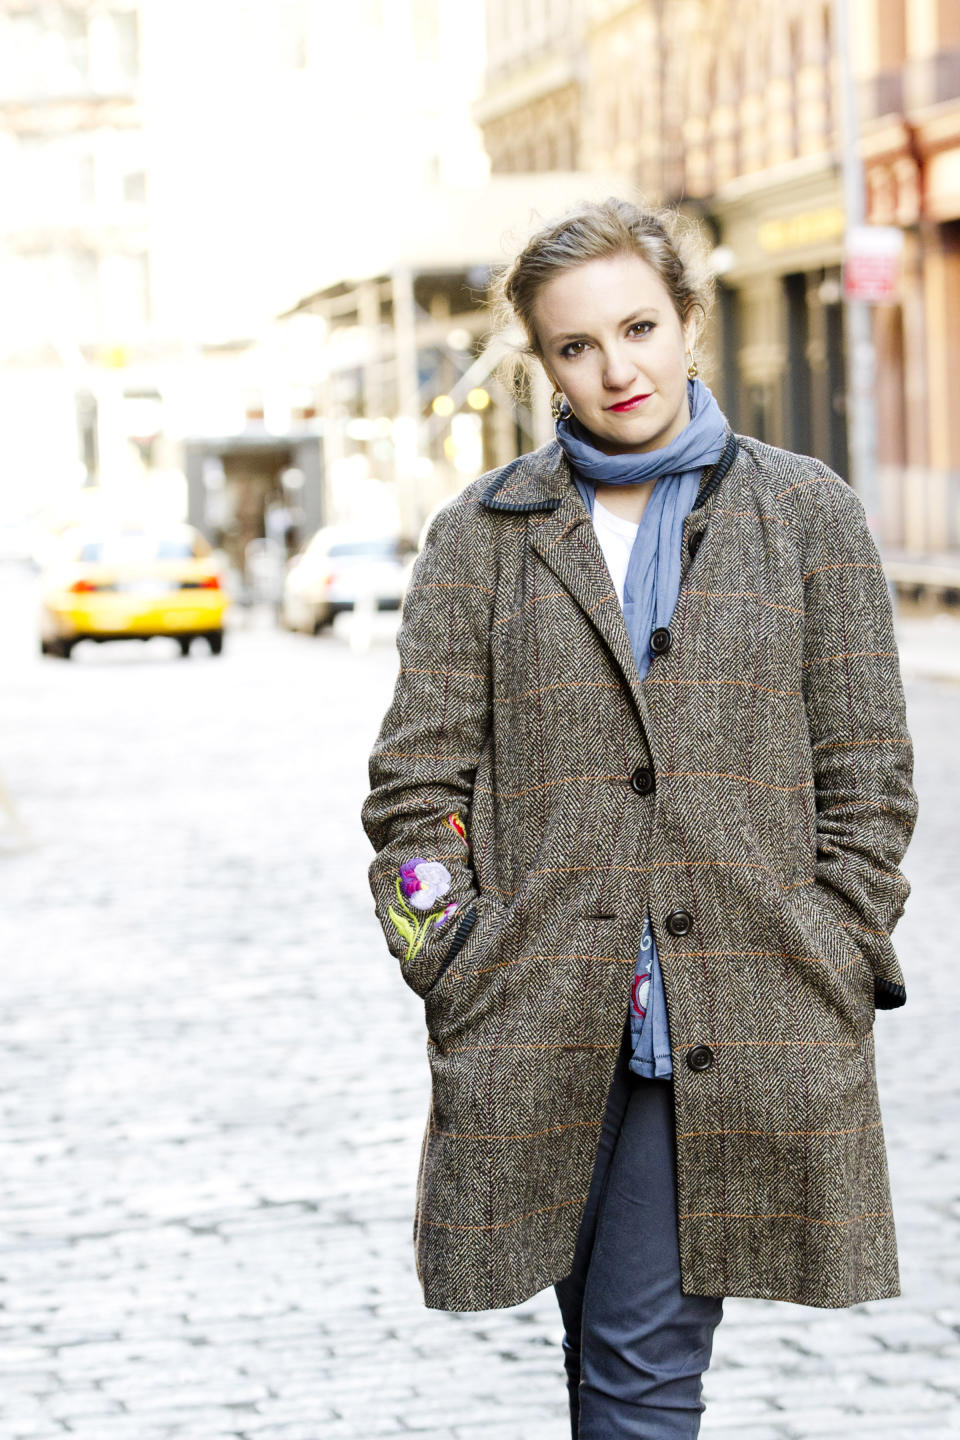 In this March 29, 2012 photo, actress Lena Dunham poses for a portrait in the Tribeca neighborhood of New York. Lena is the creator and the star in the series, "Girls," premiering April 15, at 10:30p.m. EST on HBO. (AP Photo/Charles Sykes)